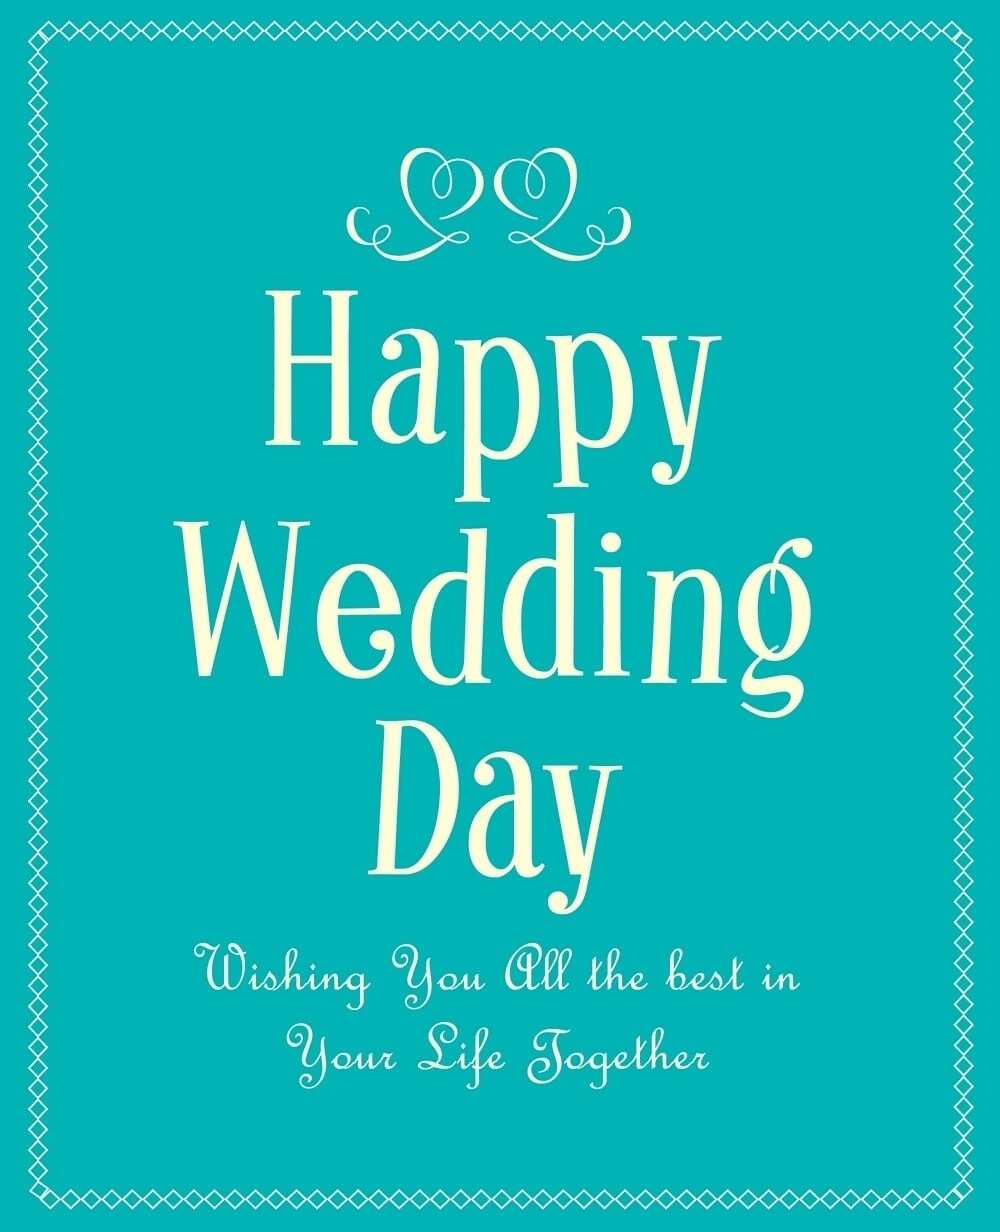 happy marriage wishes, best wishes in marriage, wishes for marriage